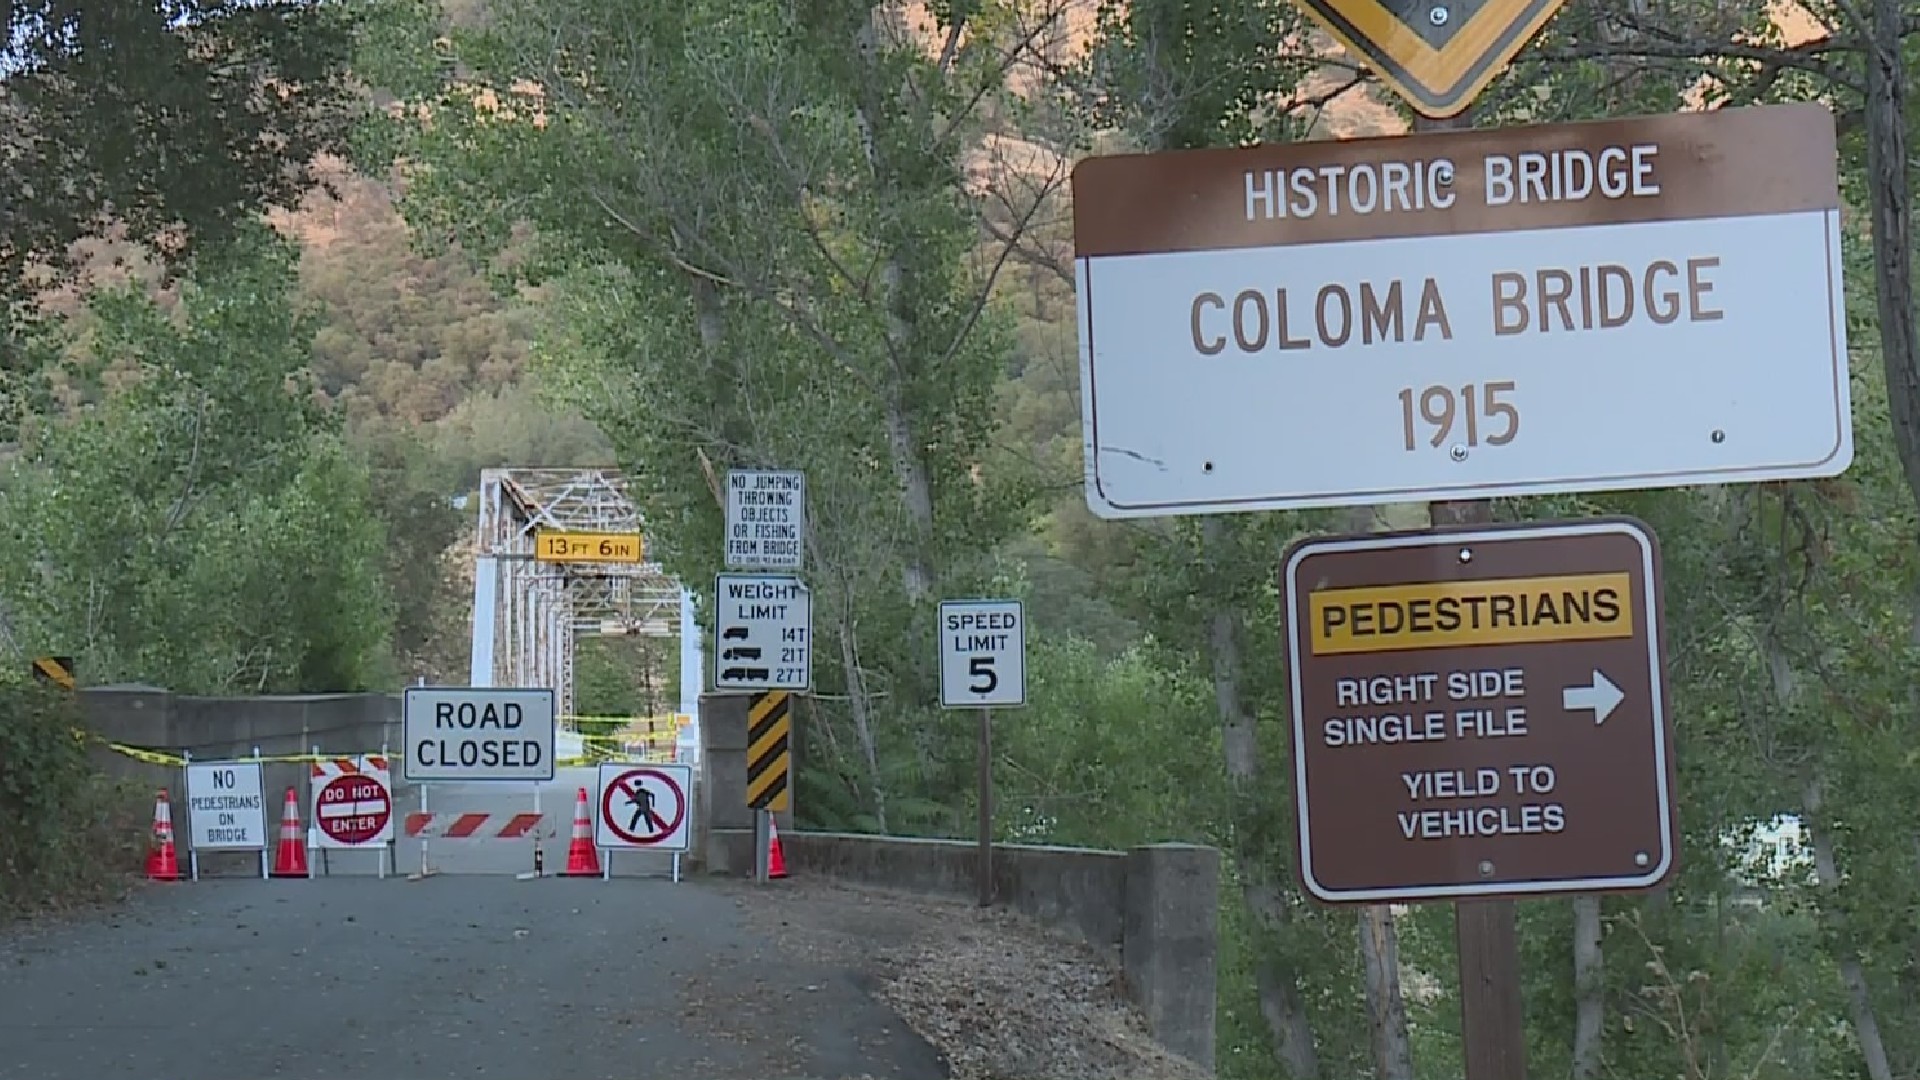 Damage From DUI Suspect Puts Historic Coloma Bridge Out Of Commission